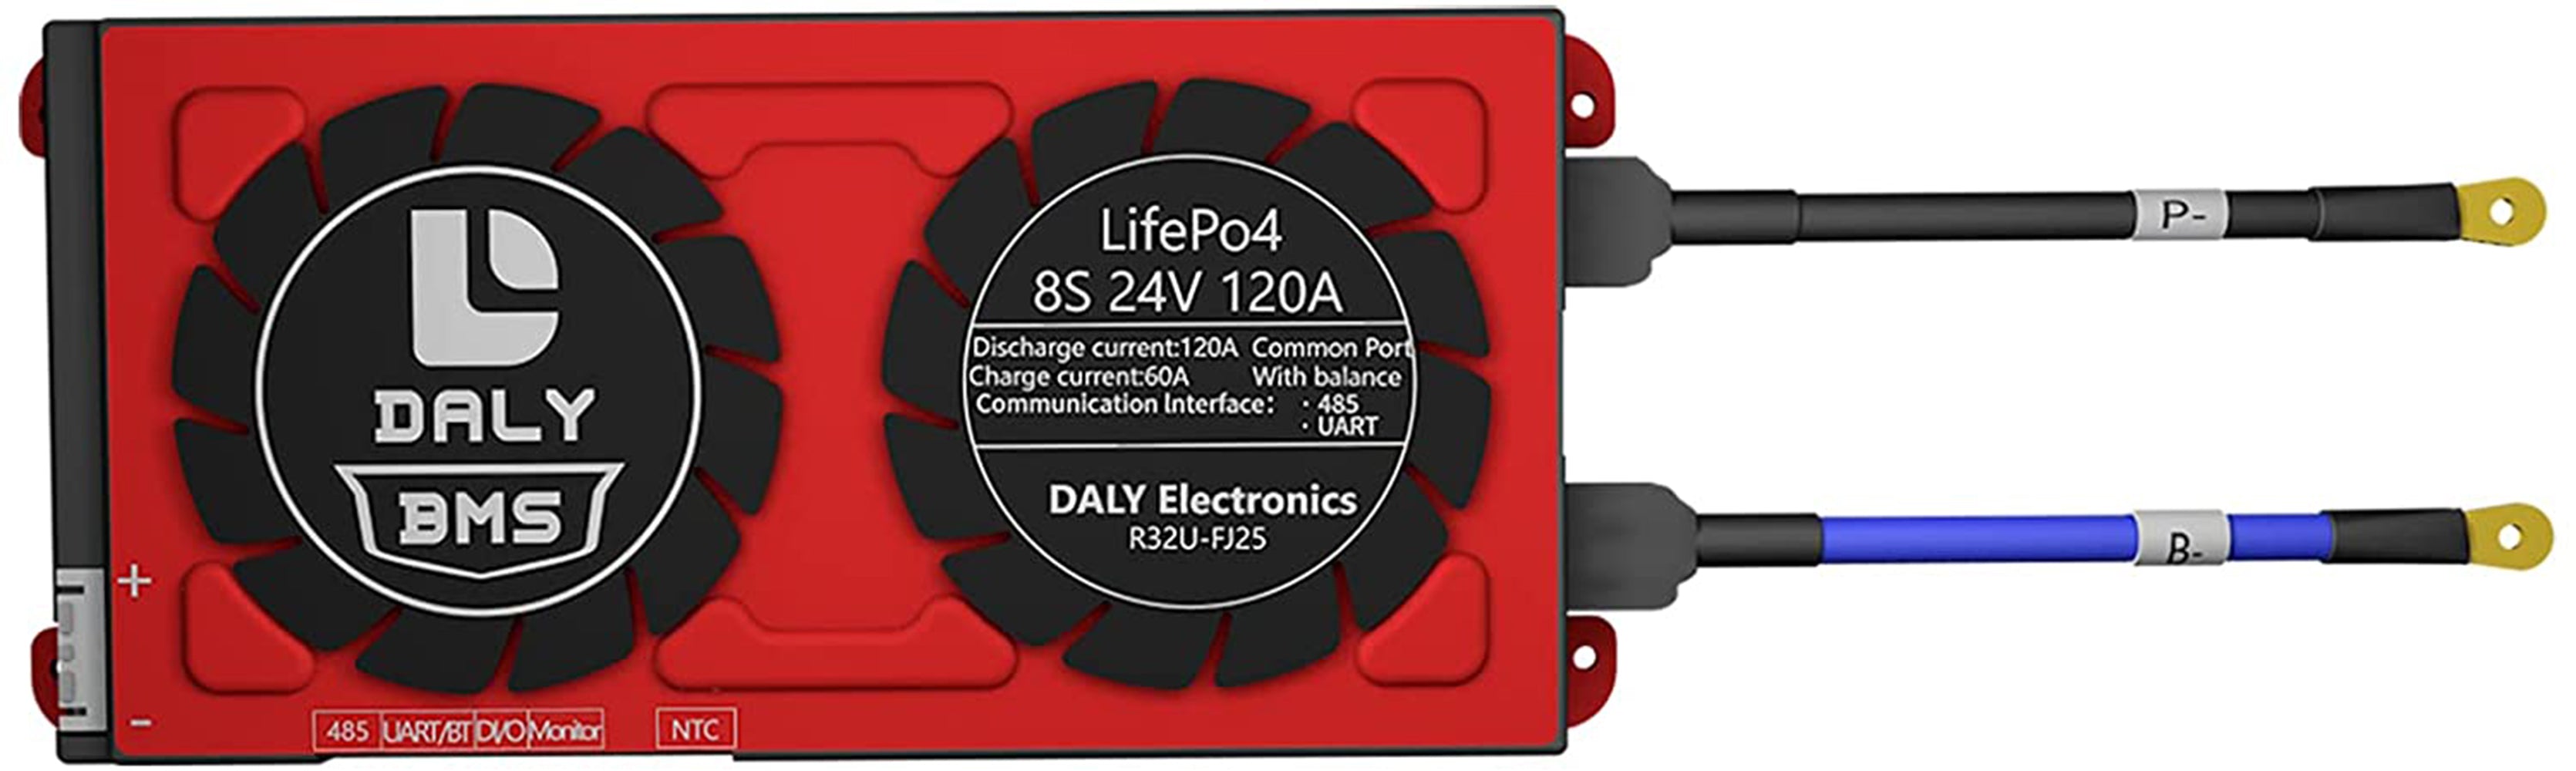 Daly smart bms Lifepo4 8S 24V 120A with Fan bluetooth 20 95 212